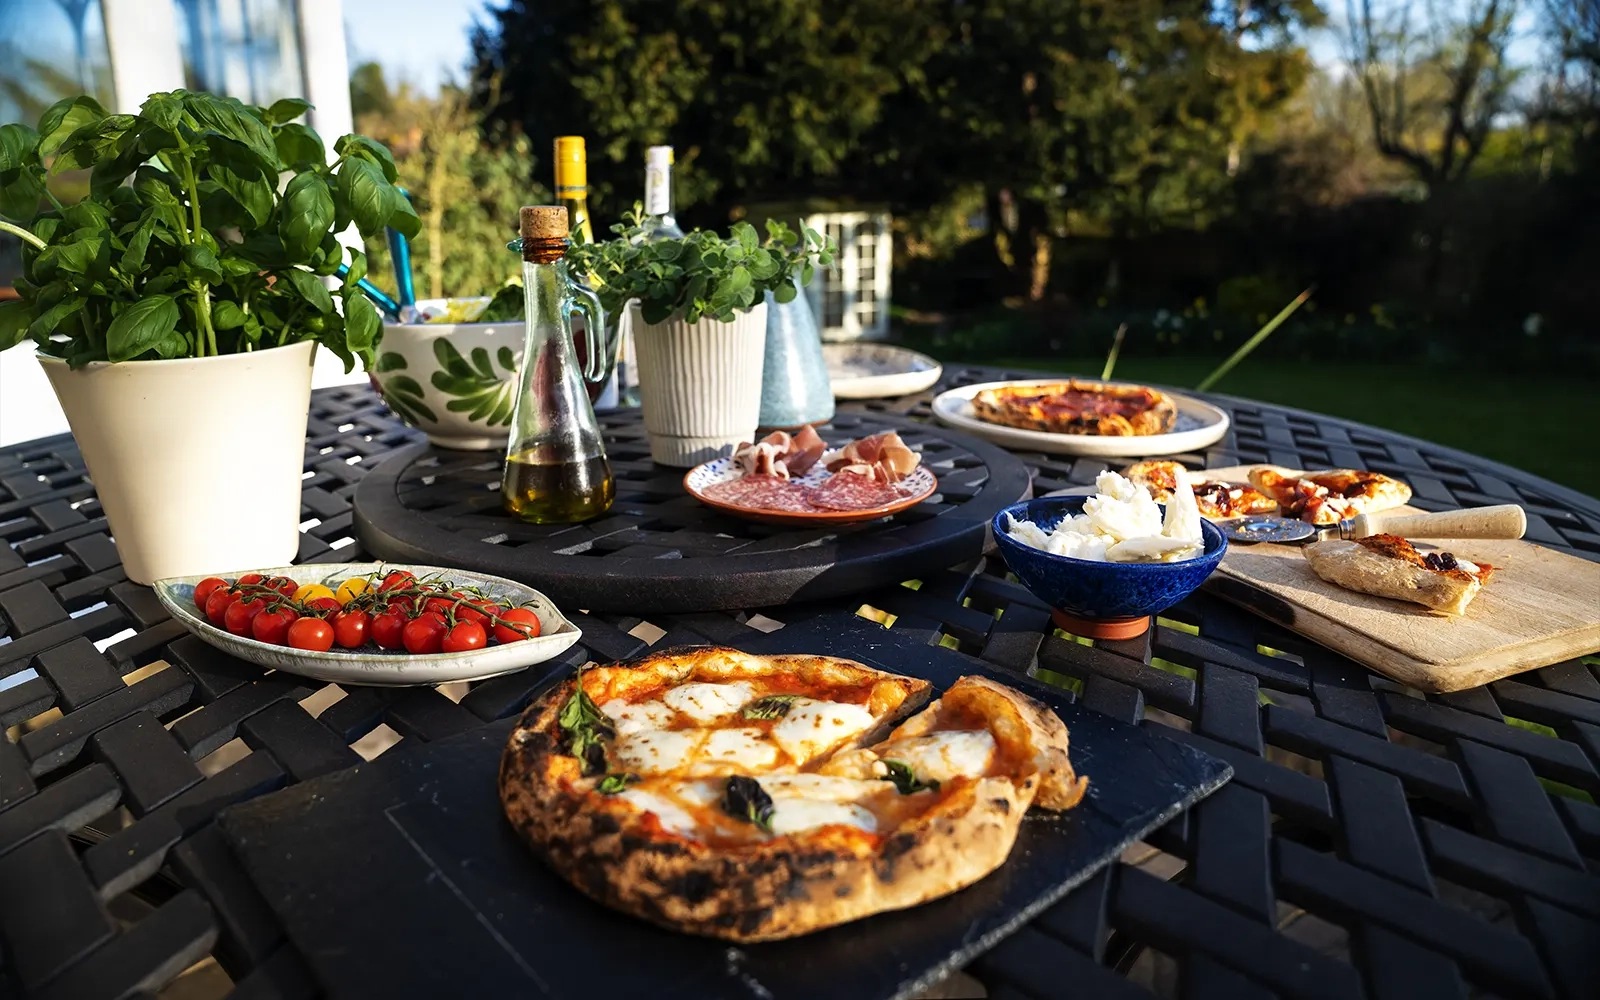 Wide angle of an outdoor table with various pizzas, condiments and salads set out beautifully